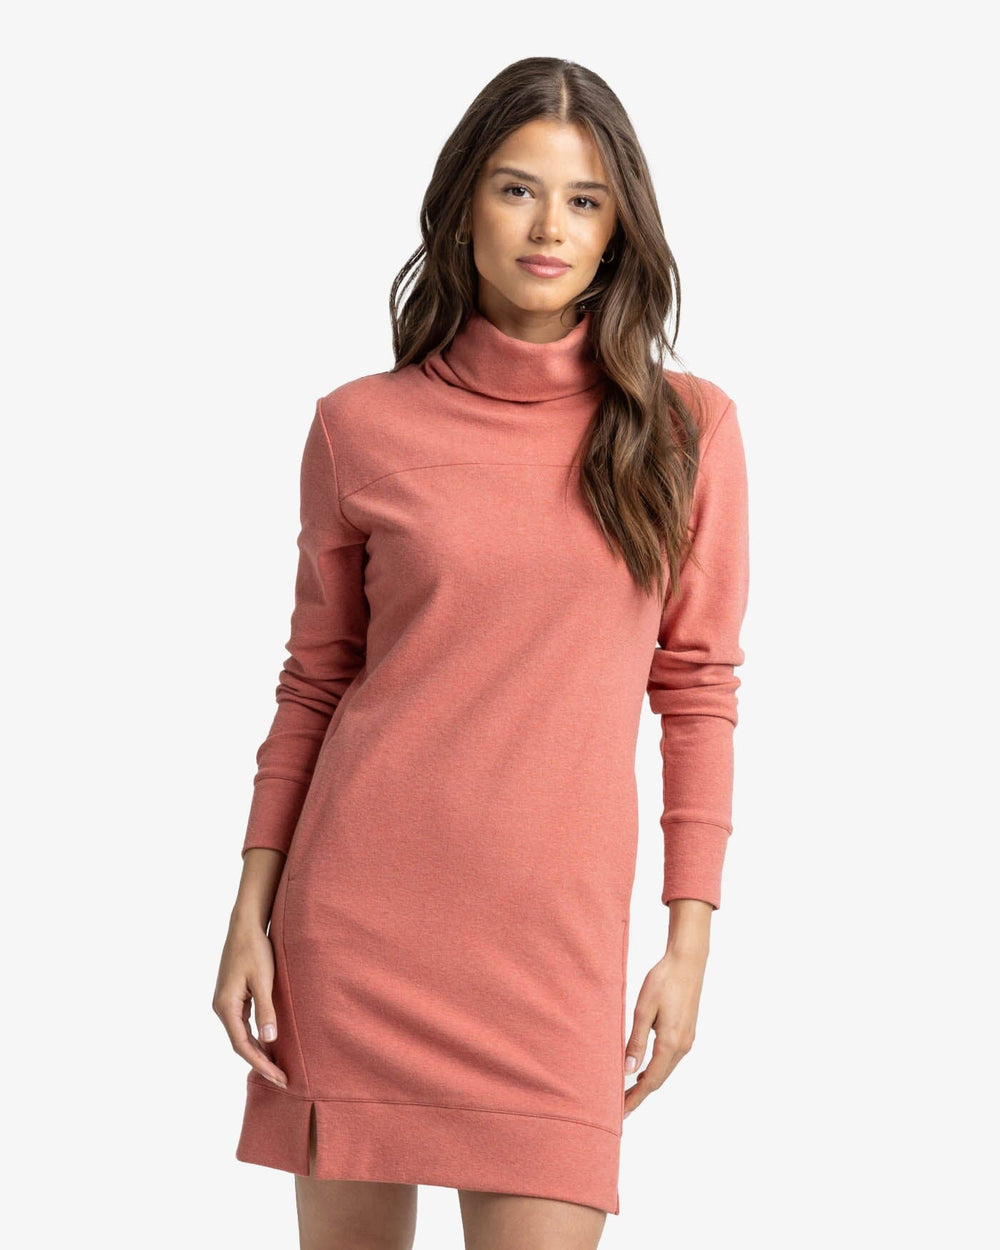 The front view of the Southern Tide Lynn Dress by Southern Tide - Heather Dusty Coral